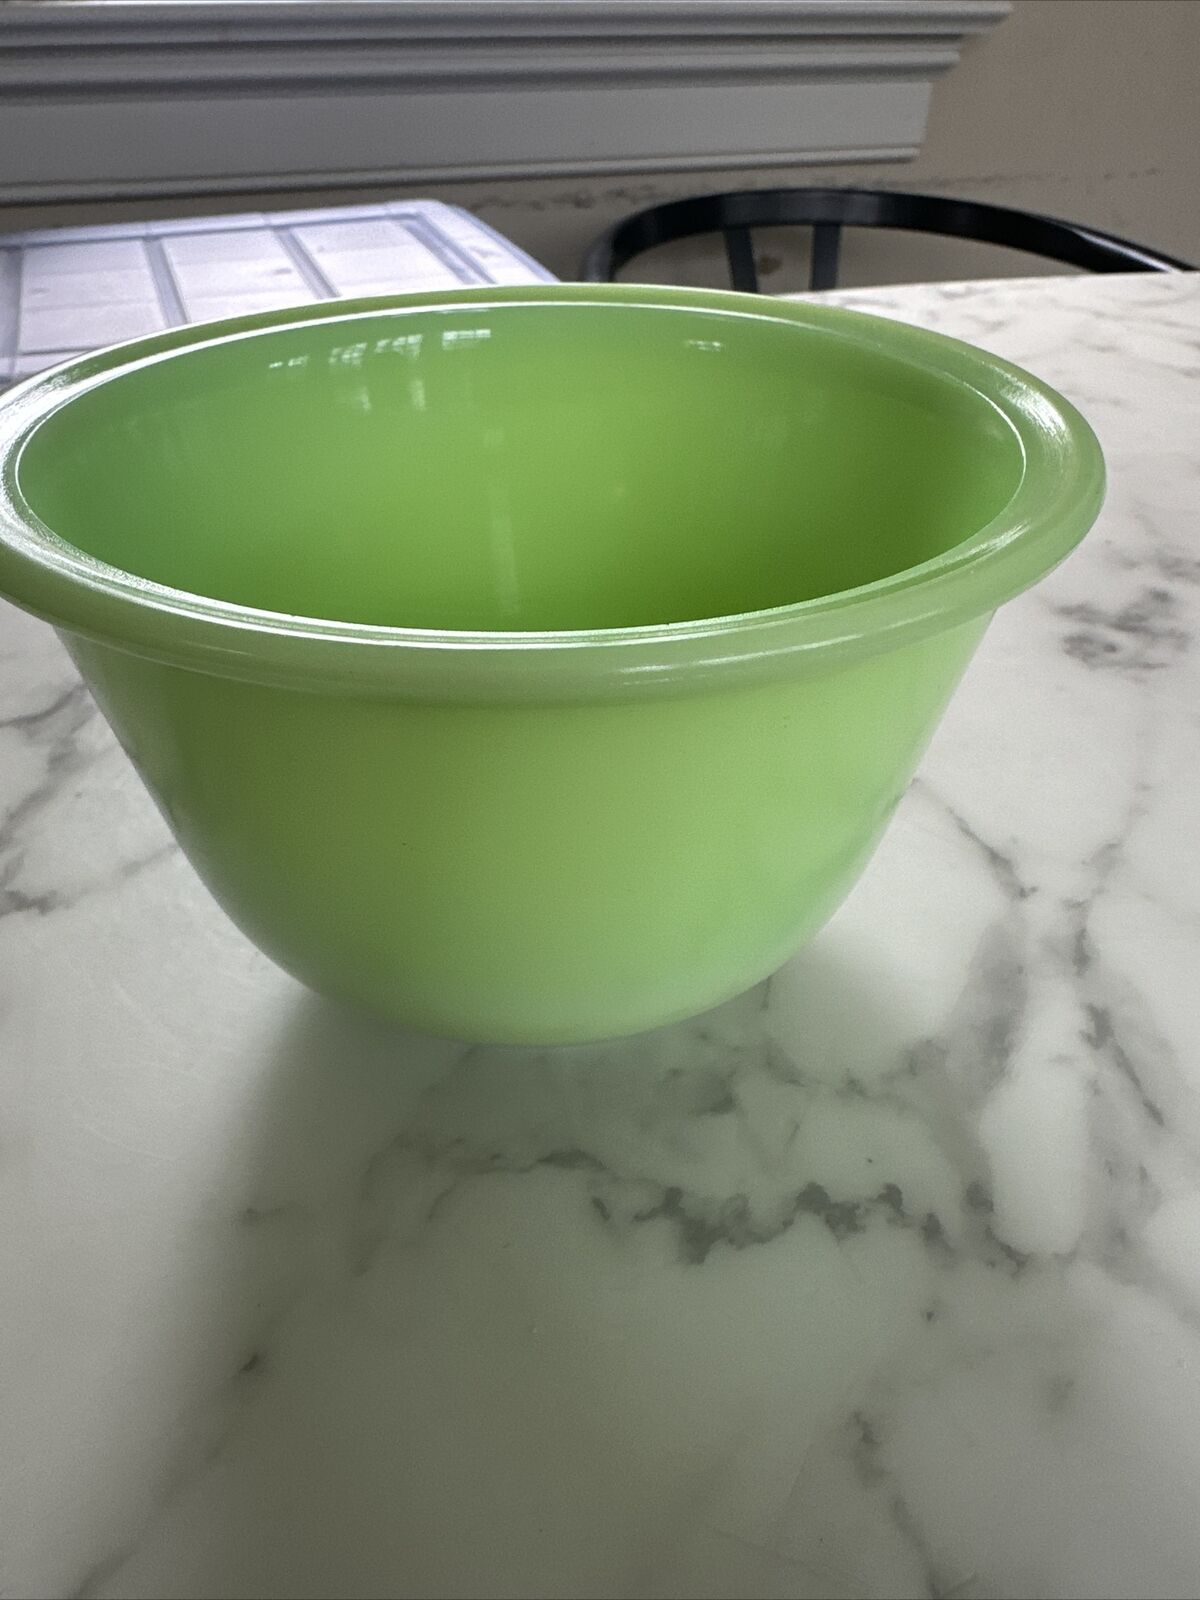 VTG Jadeite Sm Mixing Bowl Glows unmarked with flaws